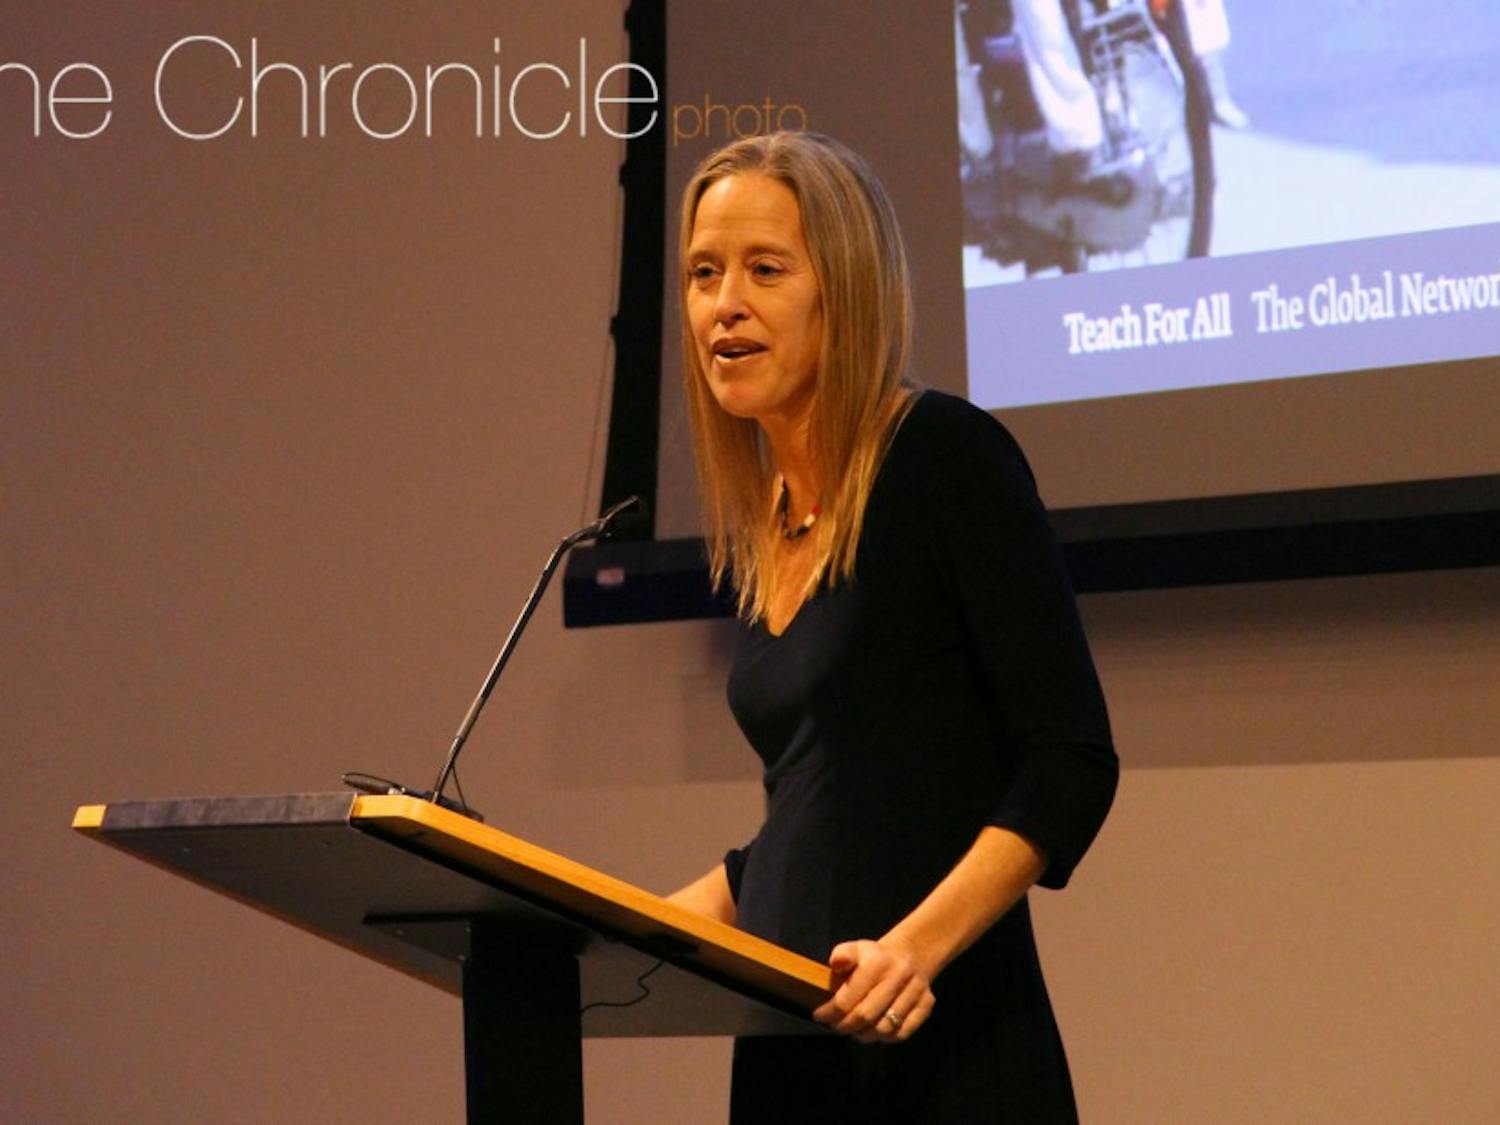 Wendy Kopp leads Teach for America, which&nbsp;recruits college graduates from top universities to serve as teachers in public schools for two years.